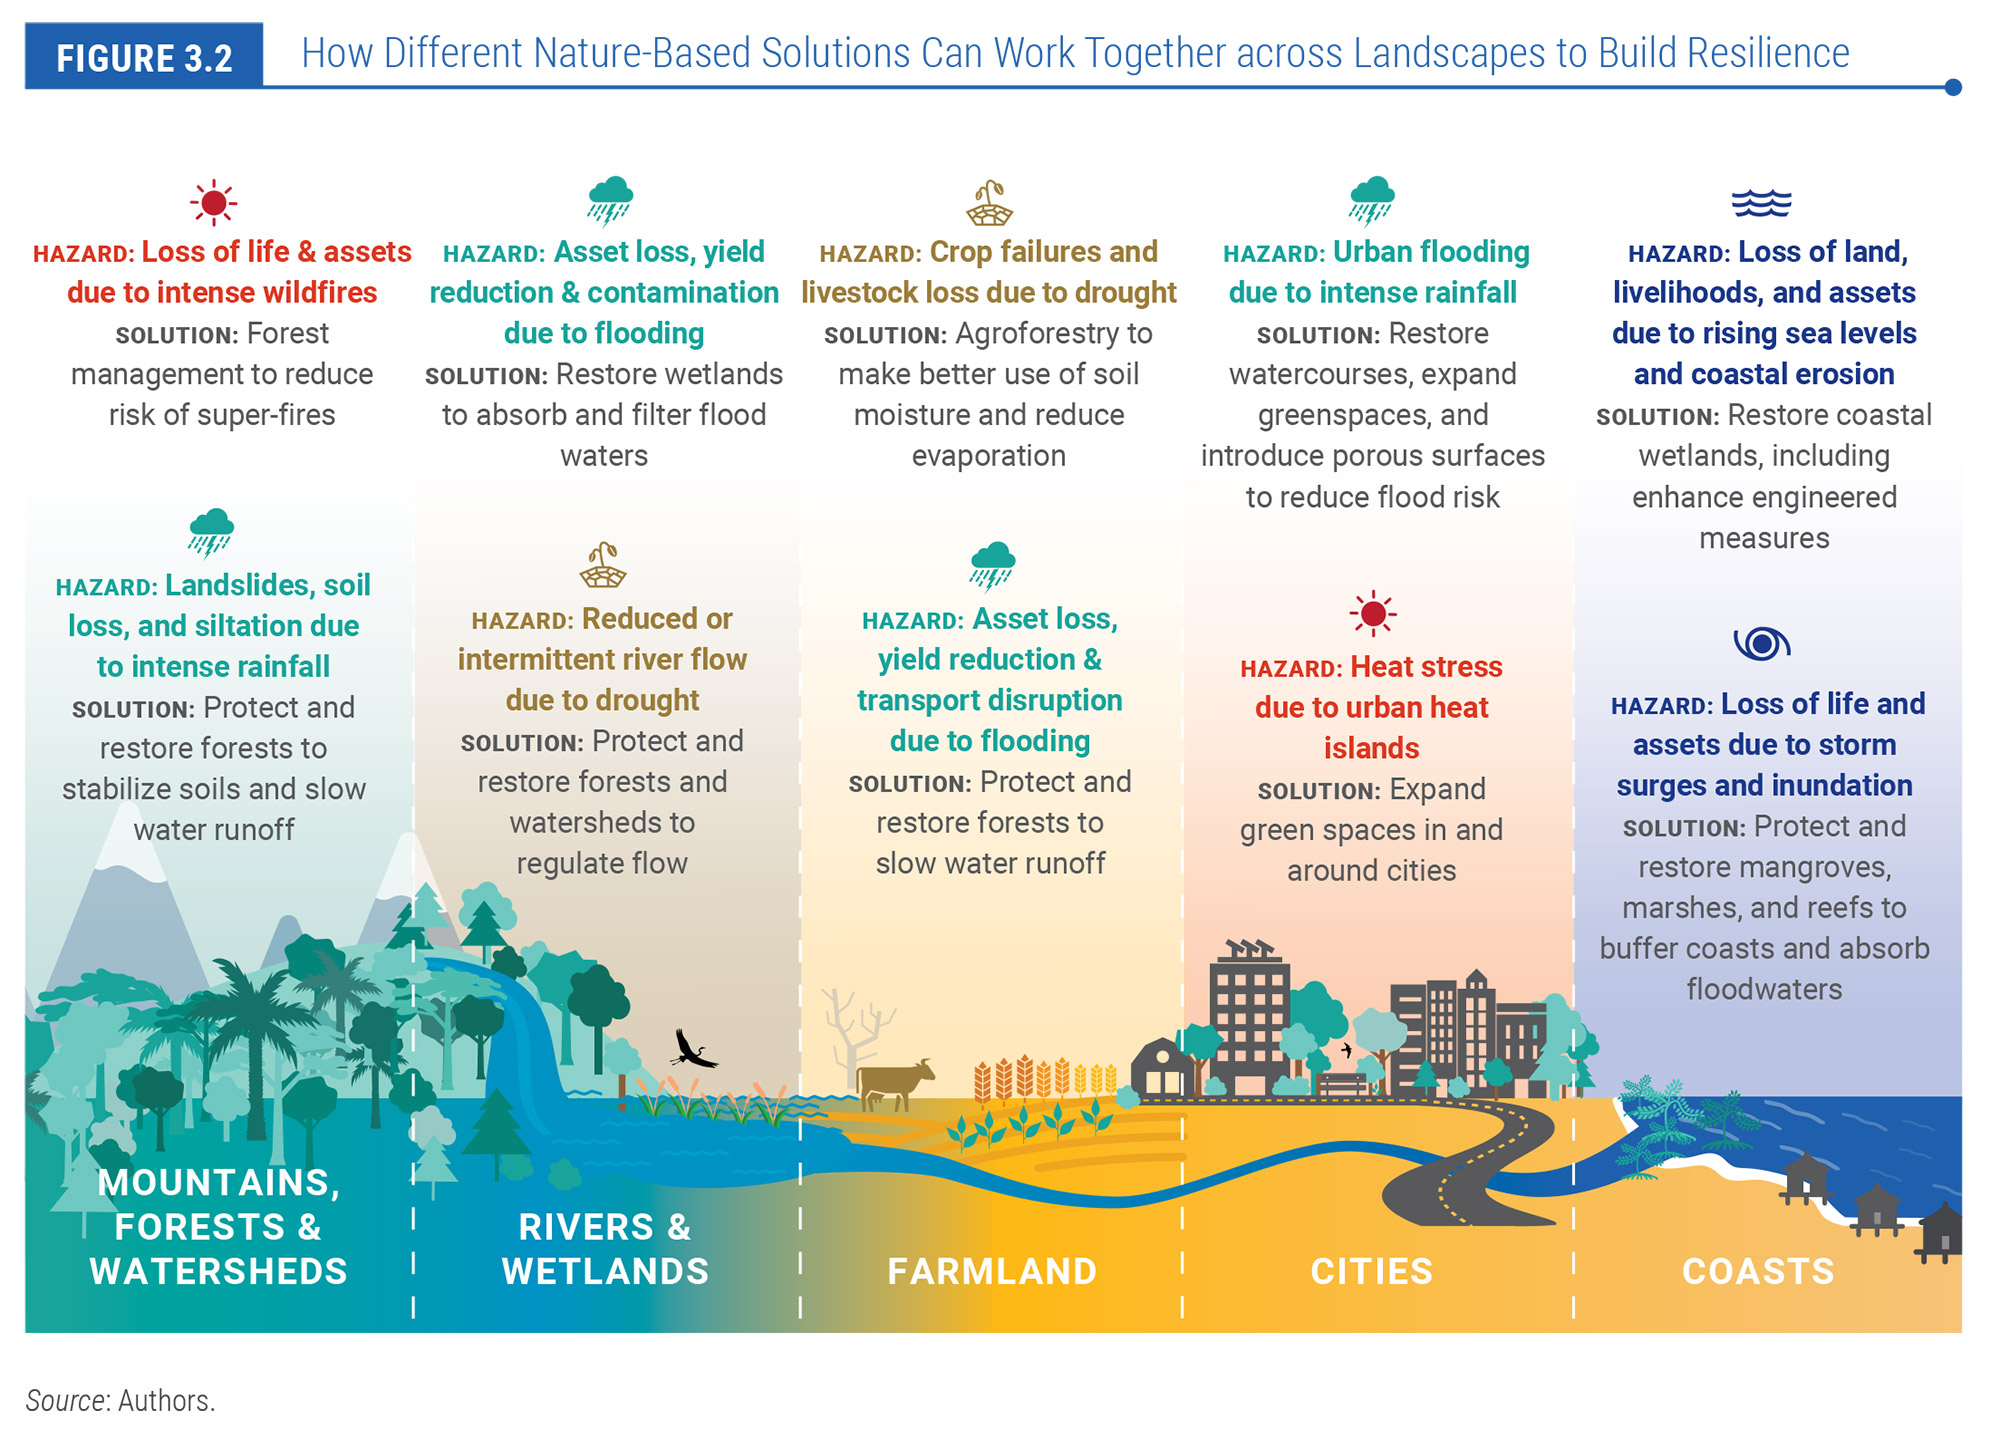 How Different Nature-Based Solutions Can Work Together across Landscapes to Build Resilience